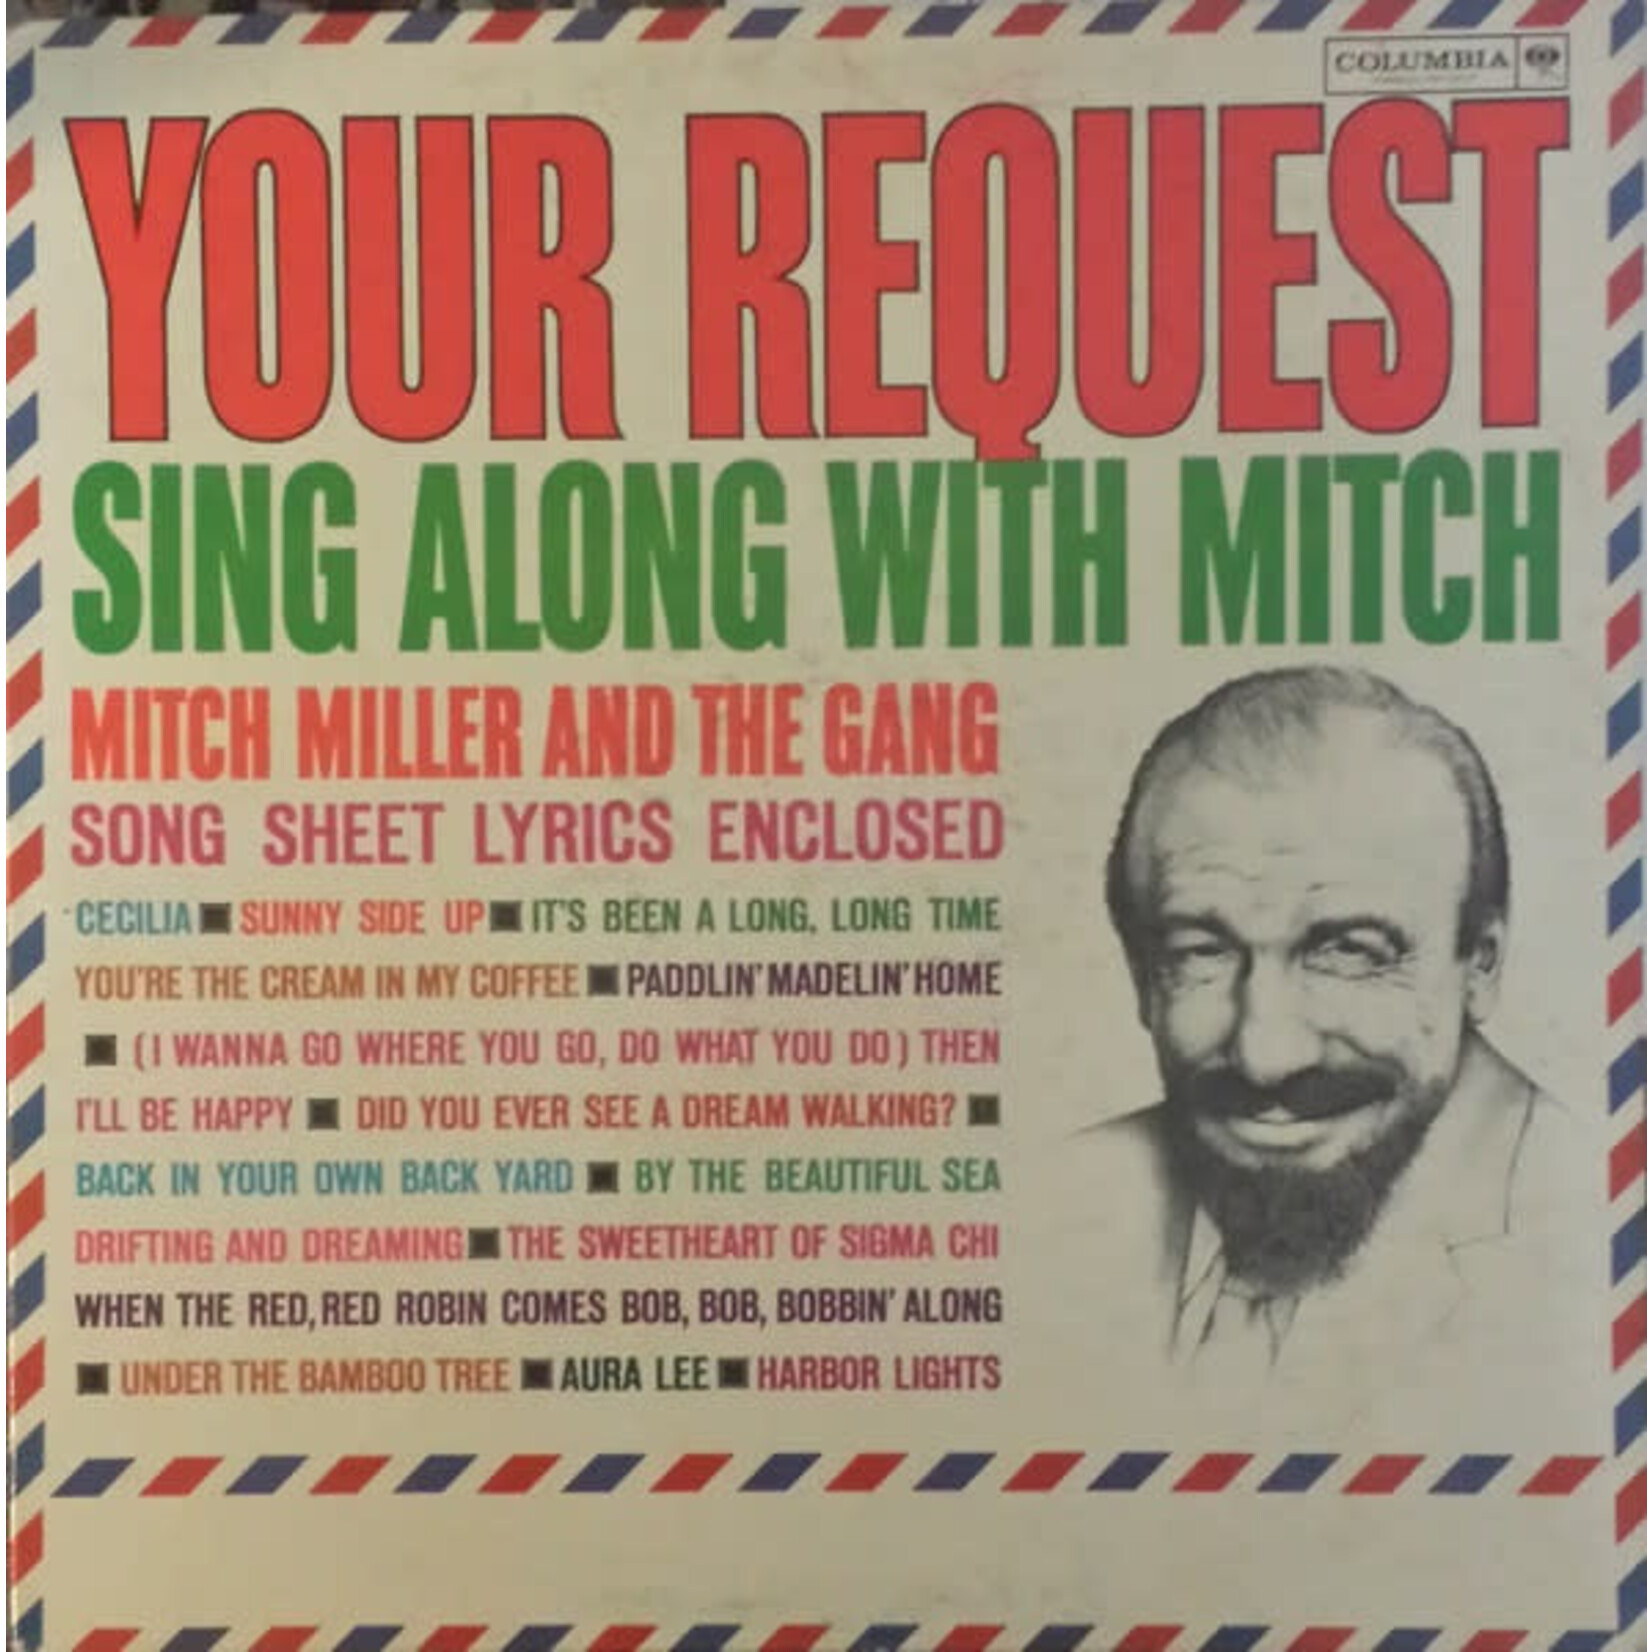 Mitch Miller And The Gang – Your Request Sing Along With Mitch (NM/SEALED VINYL, 1961, LP, Includes Lyrics Insert, Columbia – CL 1671) DSG